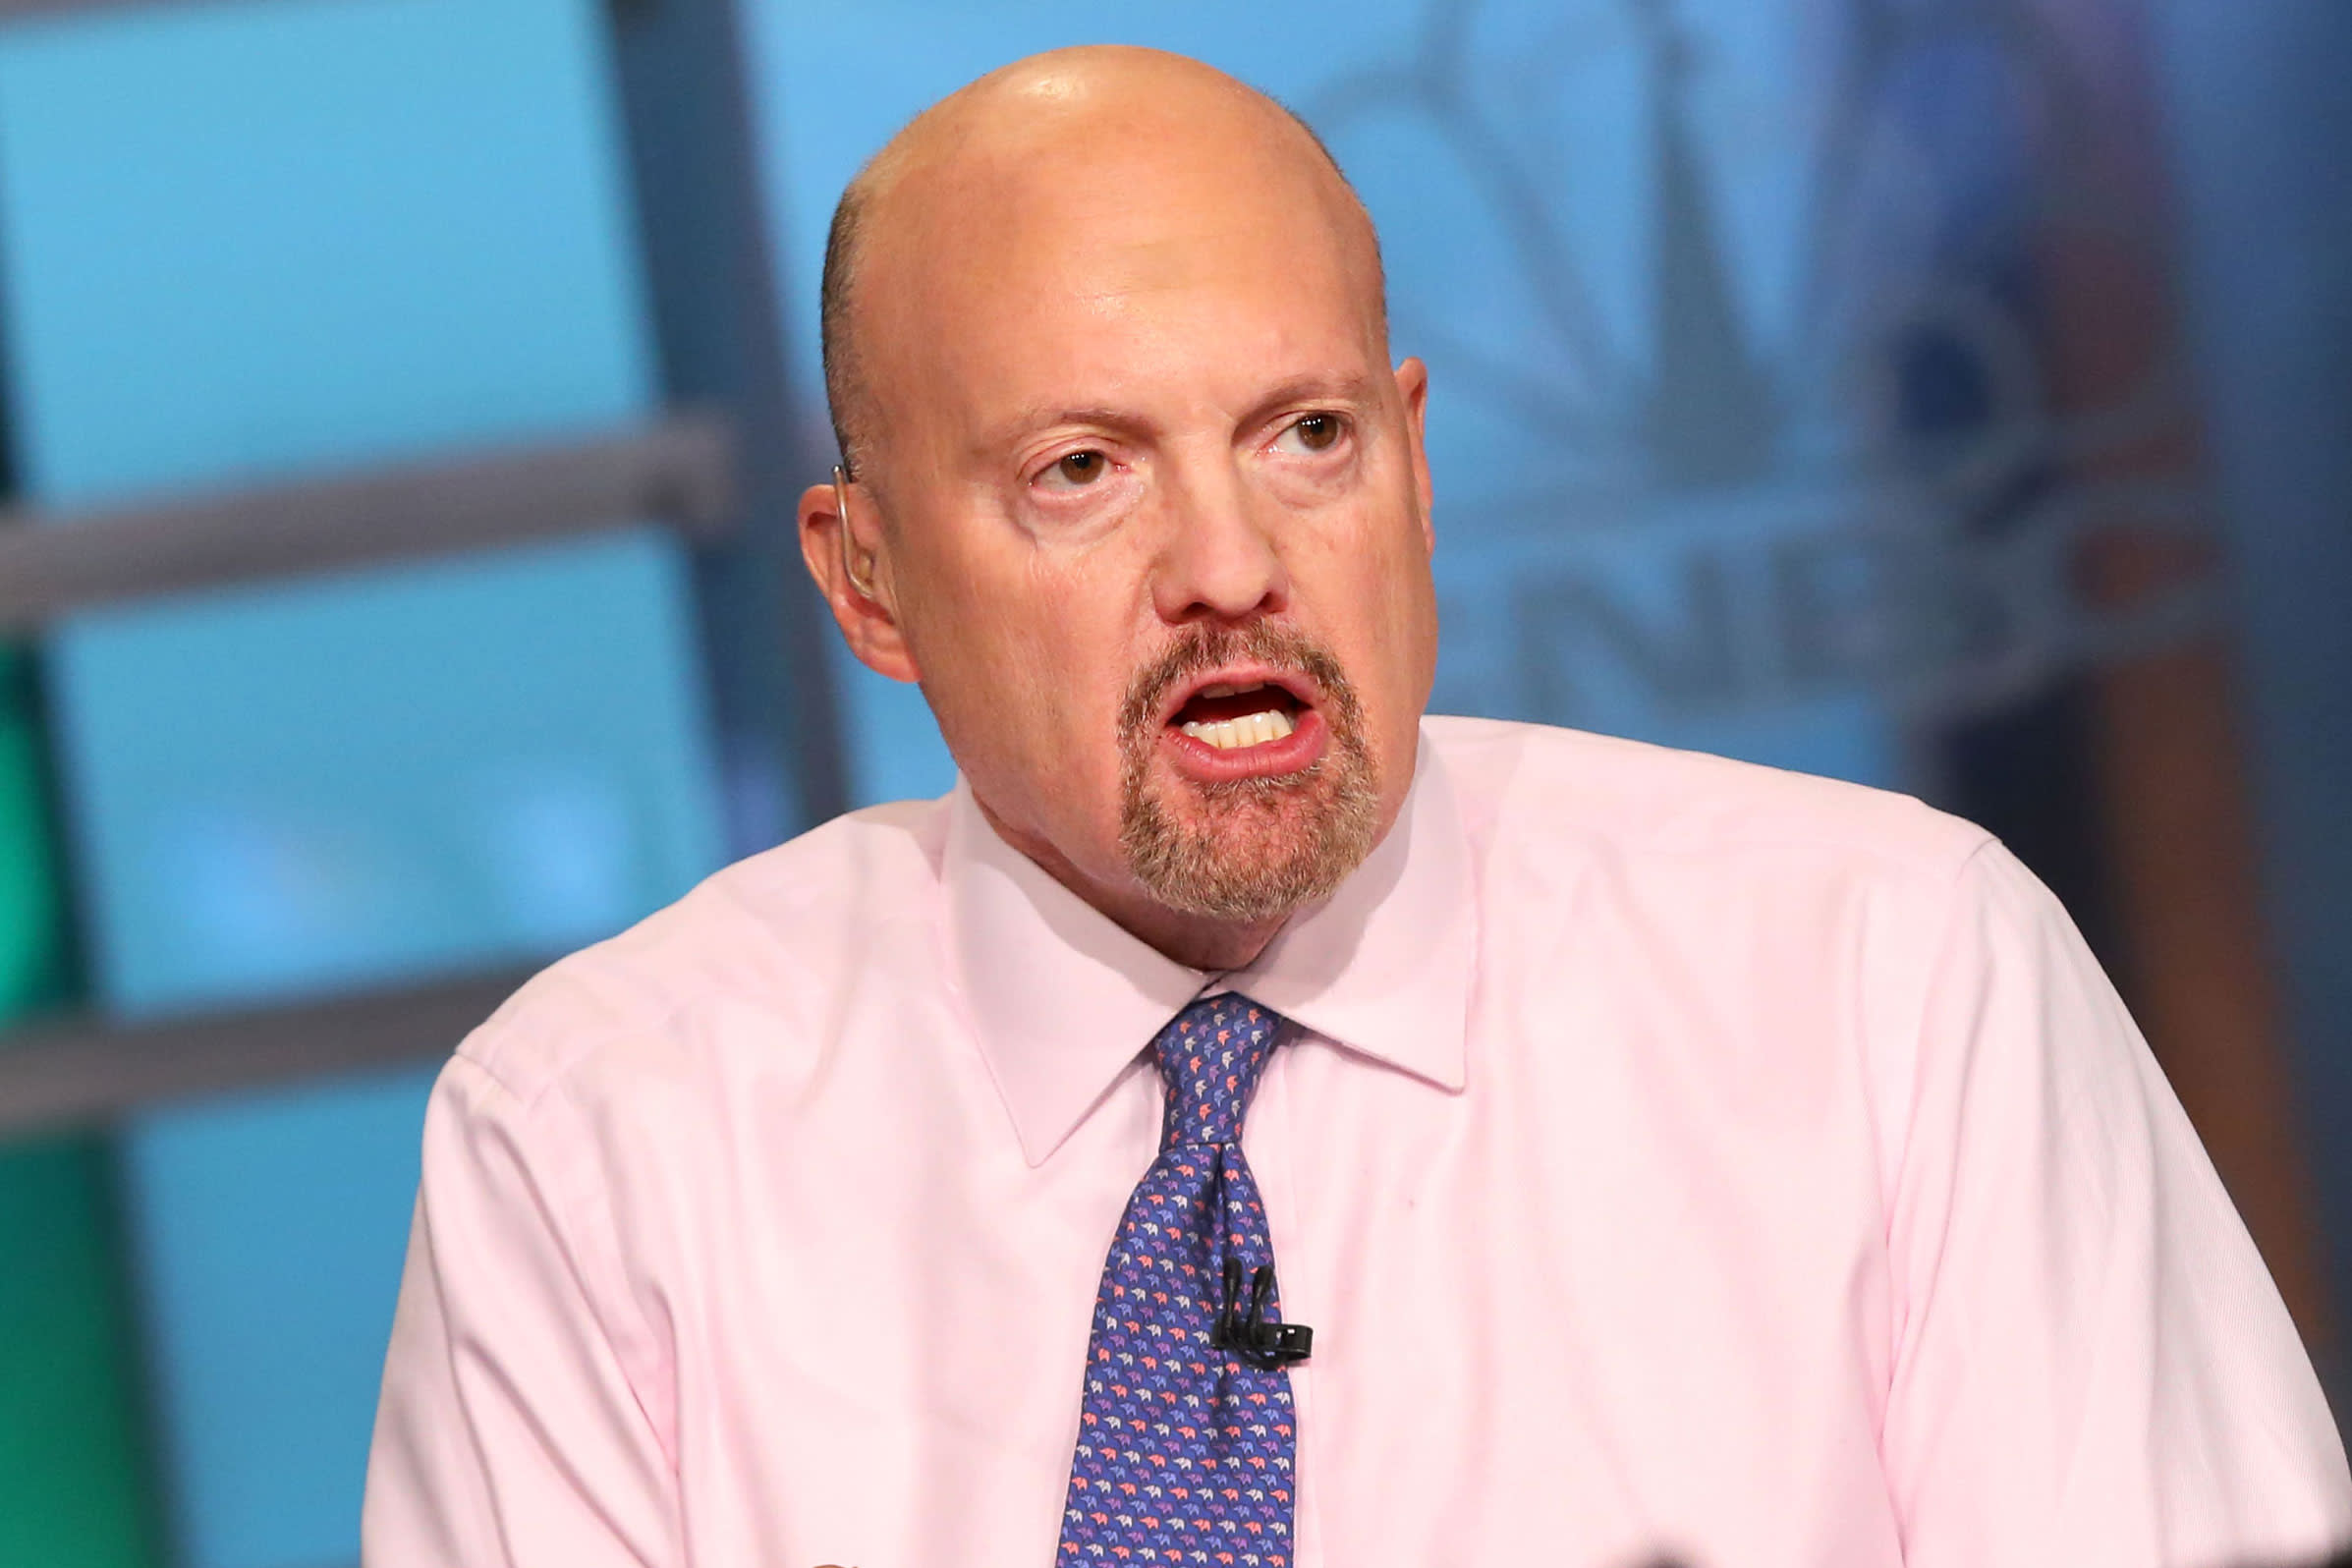 Cramer says he owns some bitcoin and sees it as an alternative to large cash positions